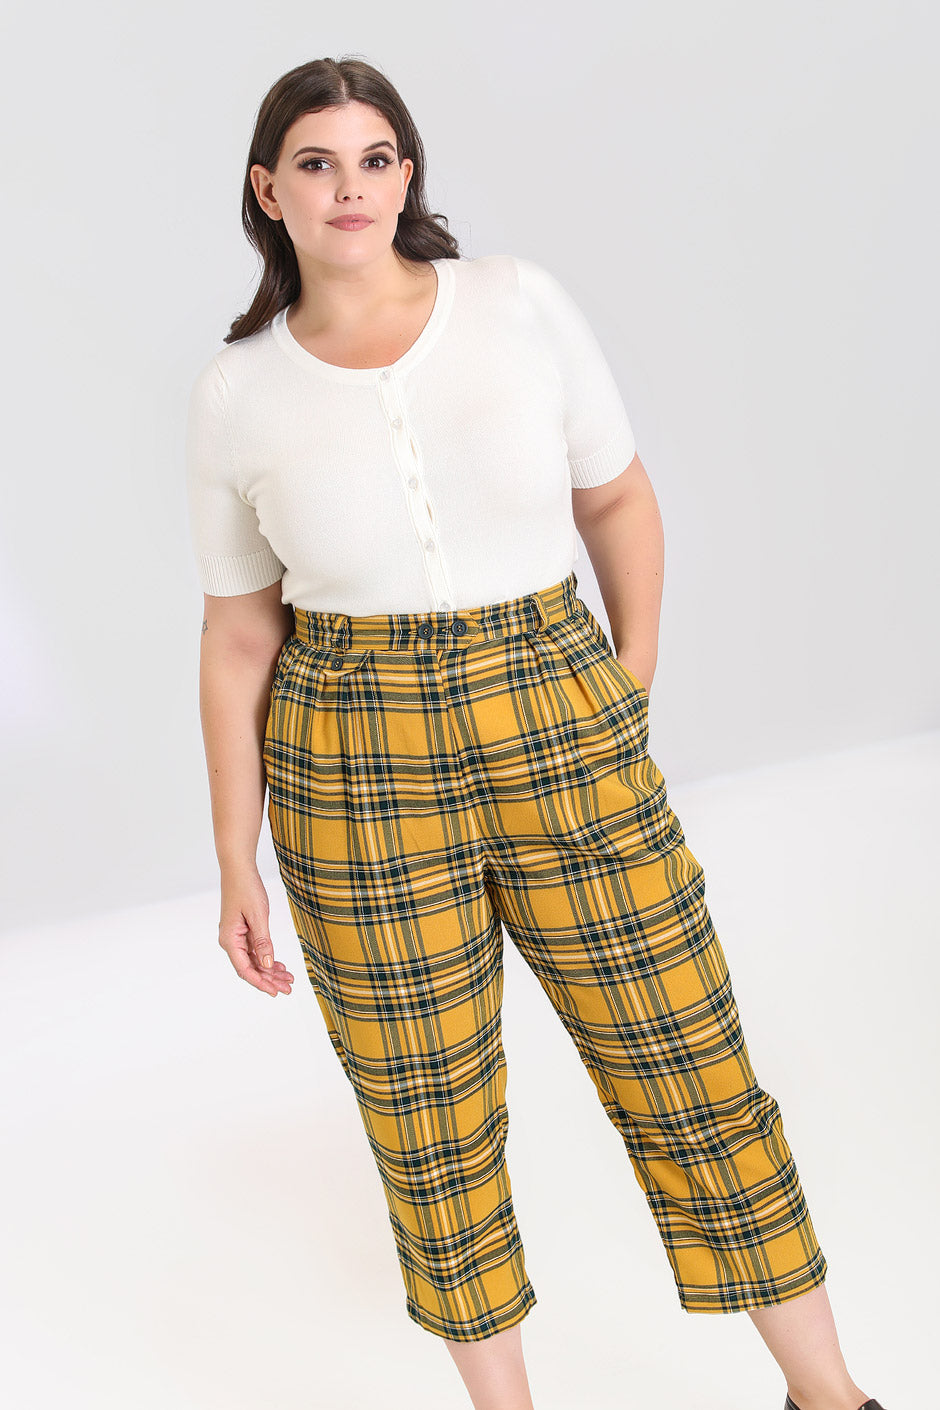 Bode Daytime Plaid Trousers YellowGreen  Neighbour